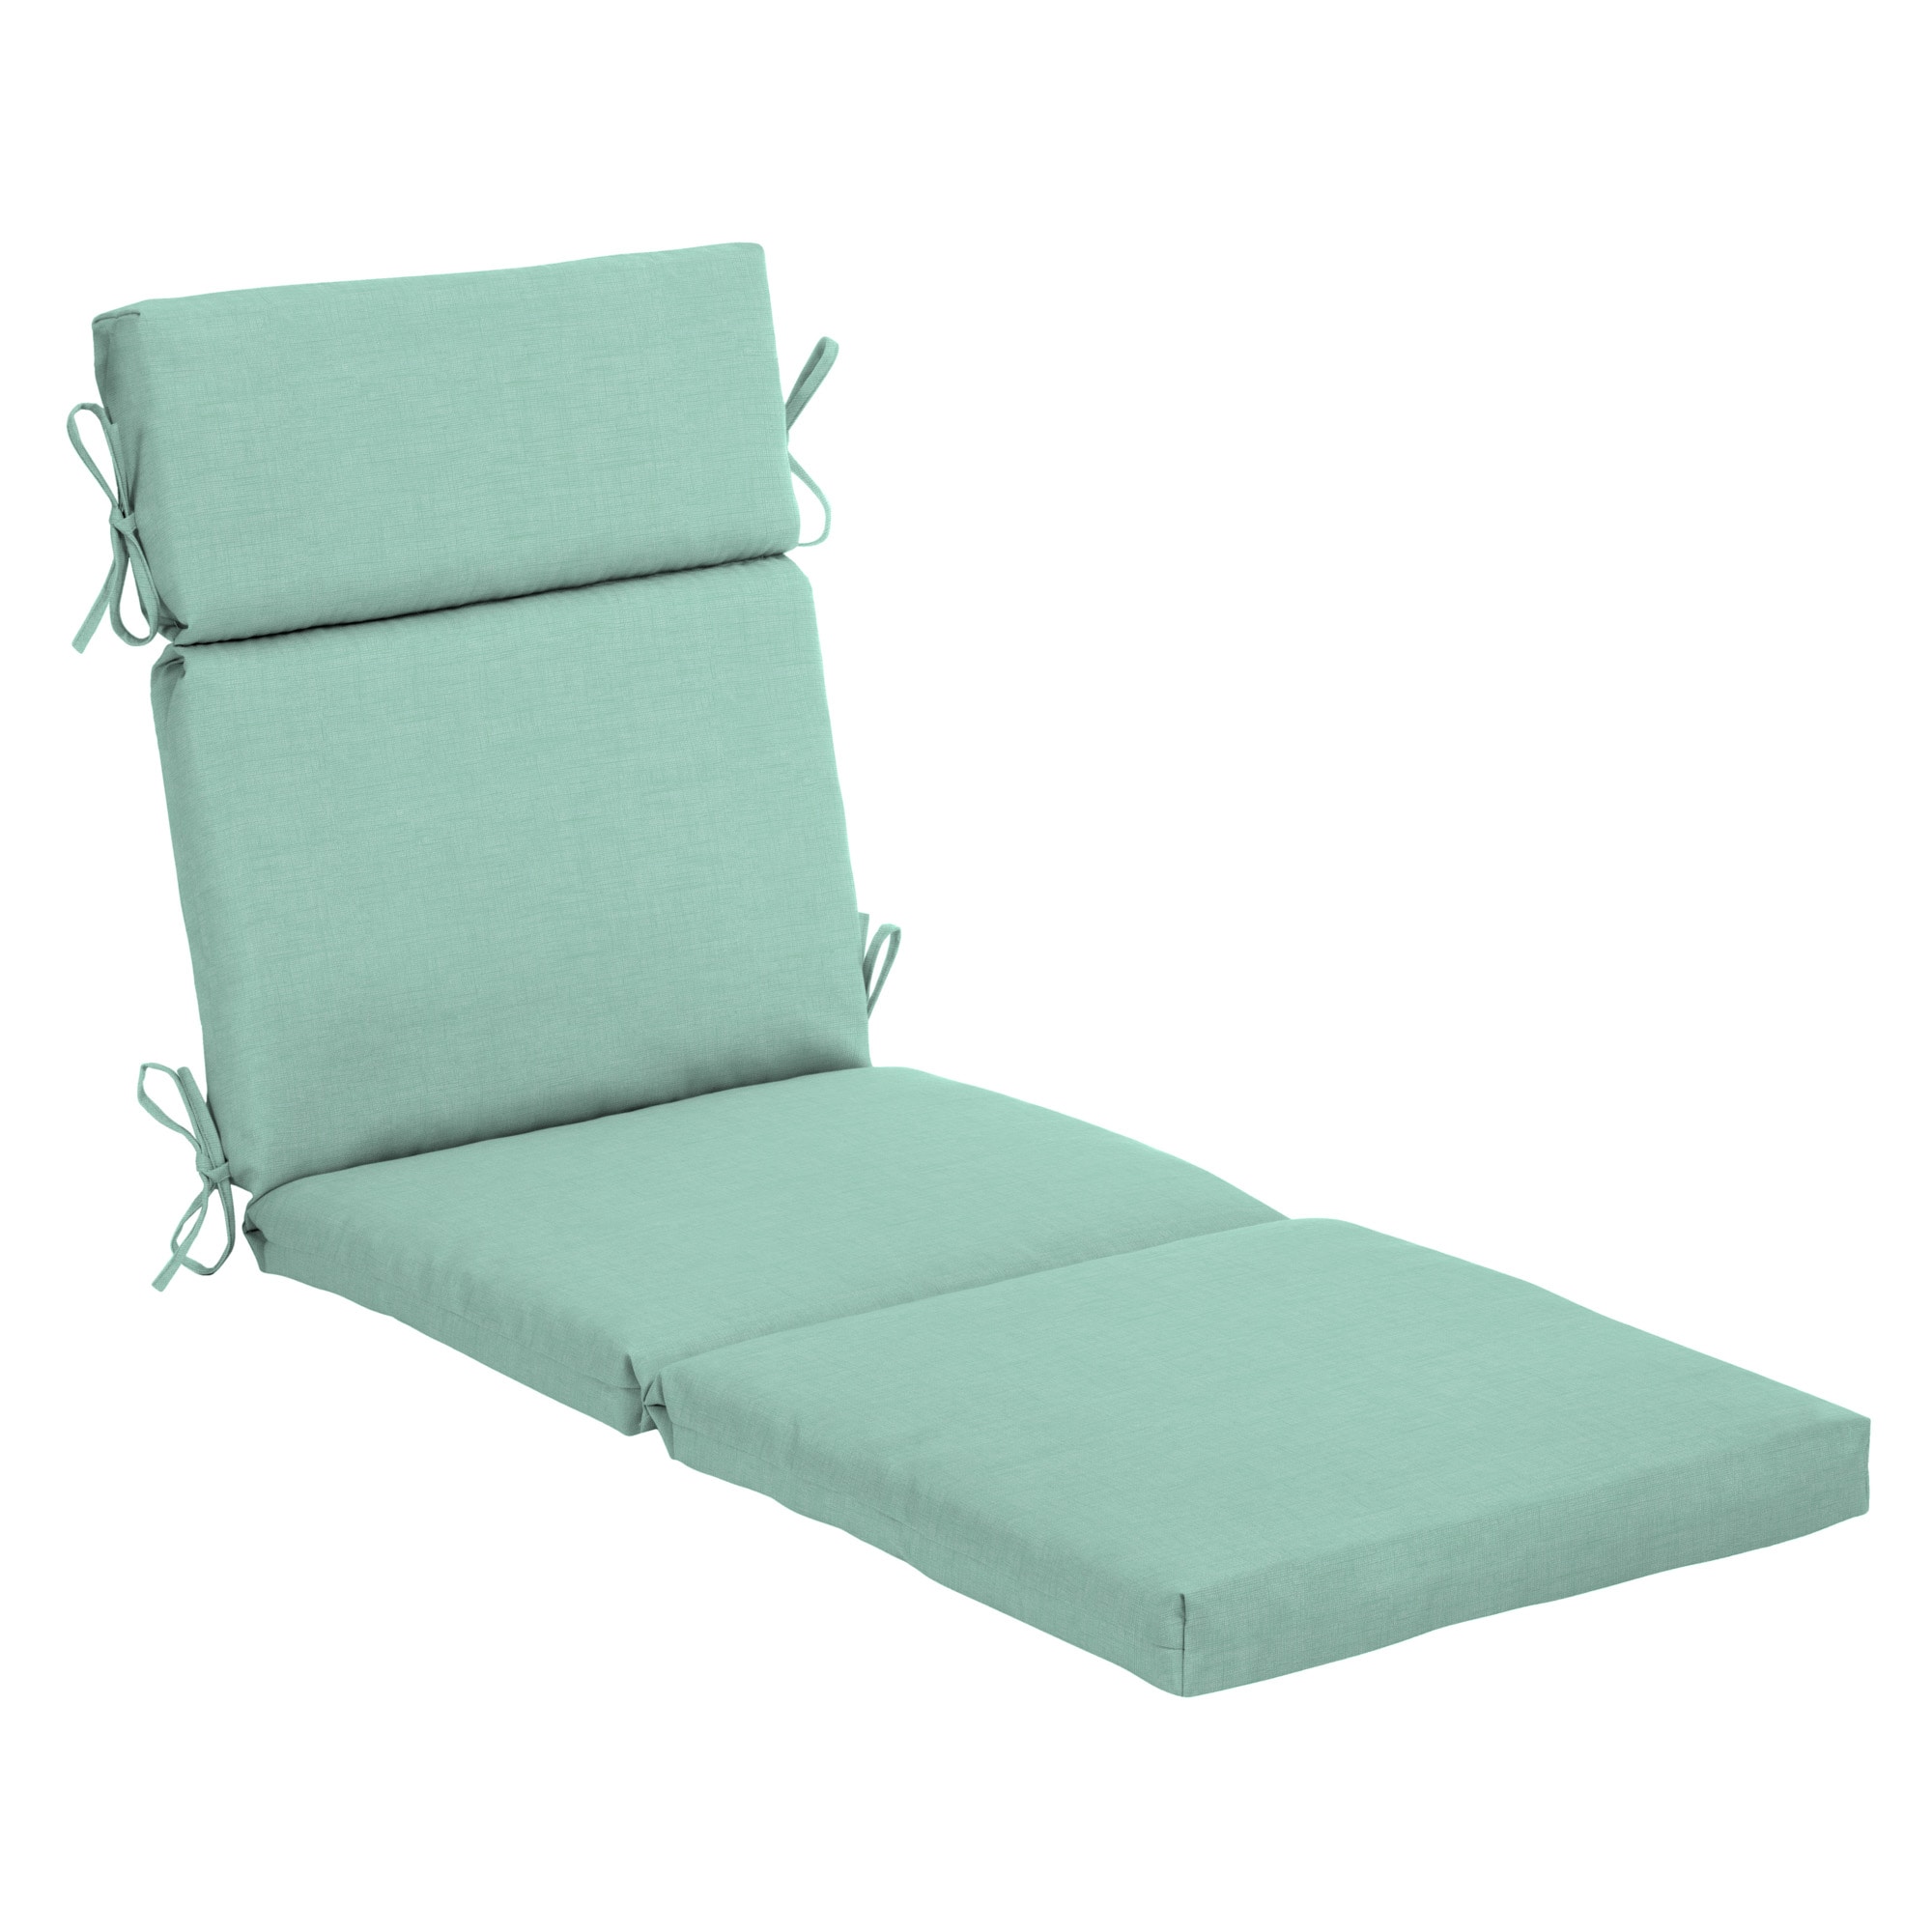 Blue Water Resistant 4 Part Lounger Cushion Pad ONLY *Lounger not included*